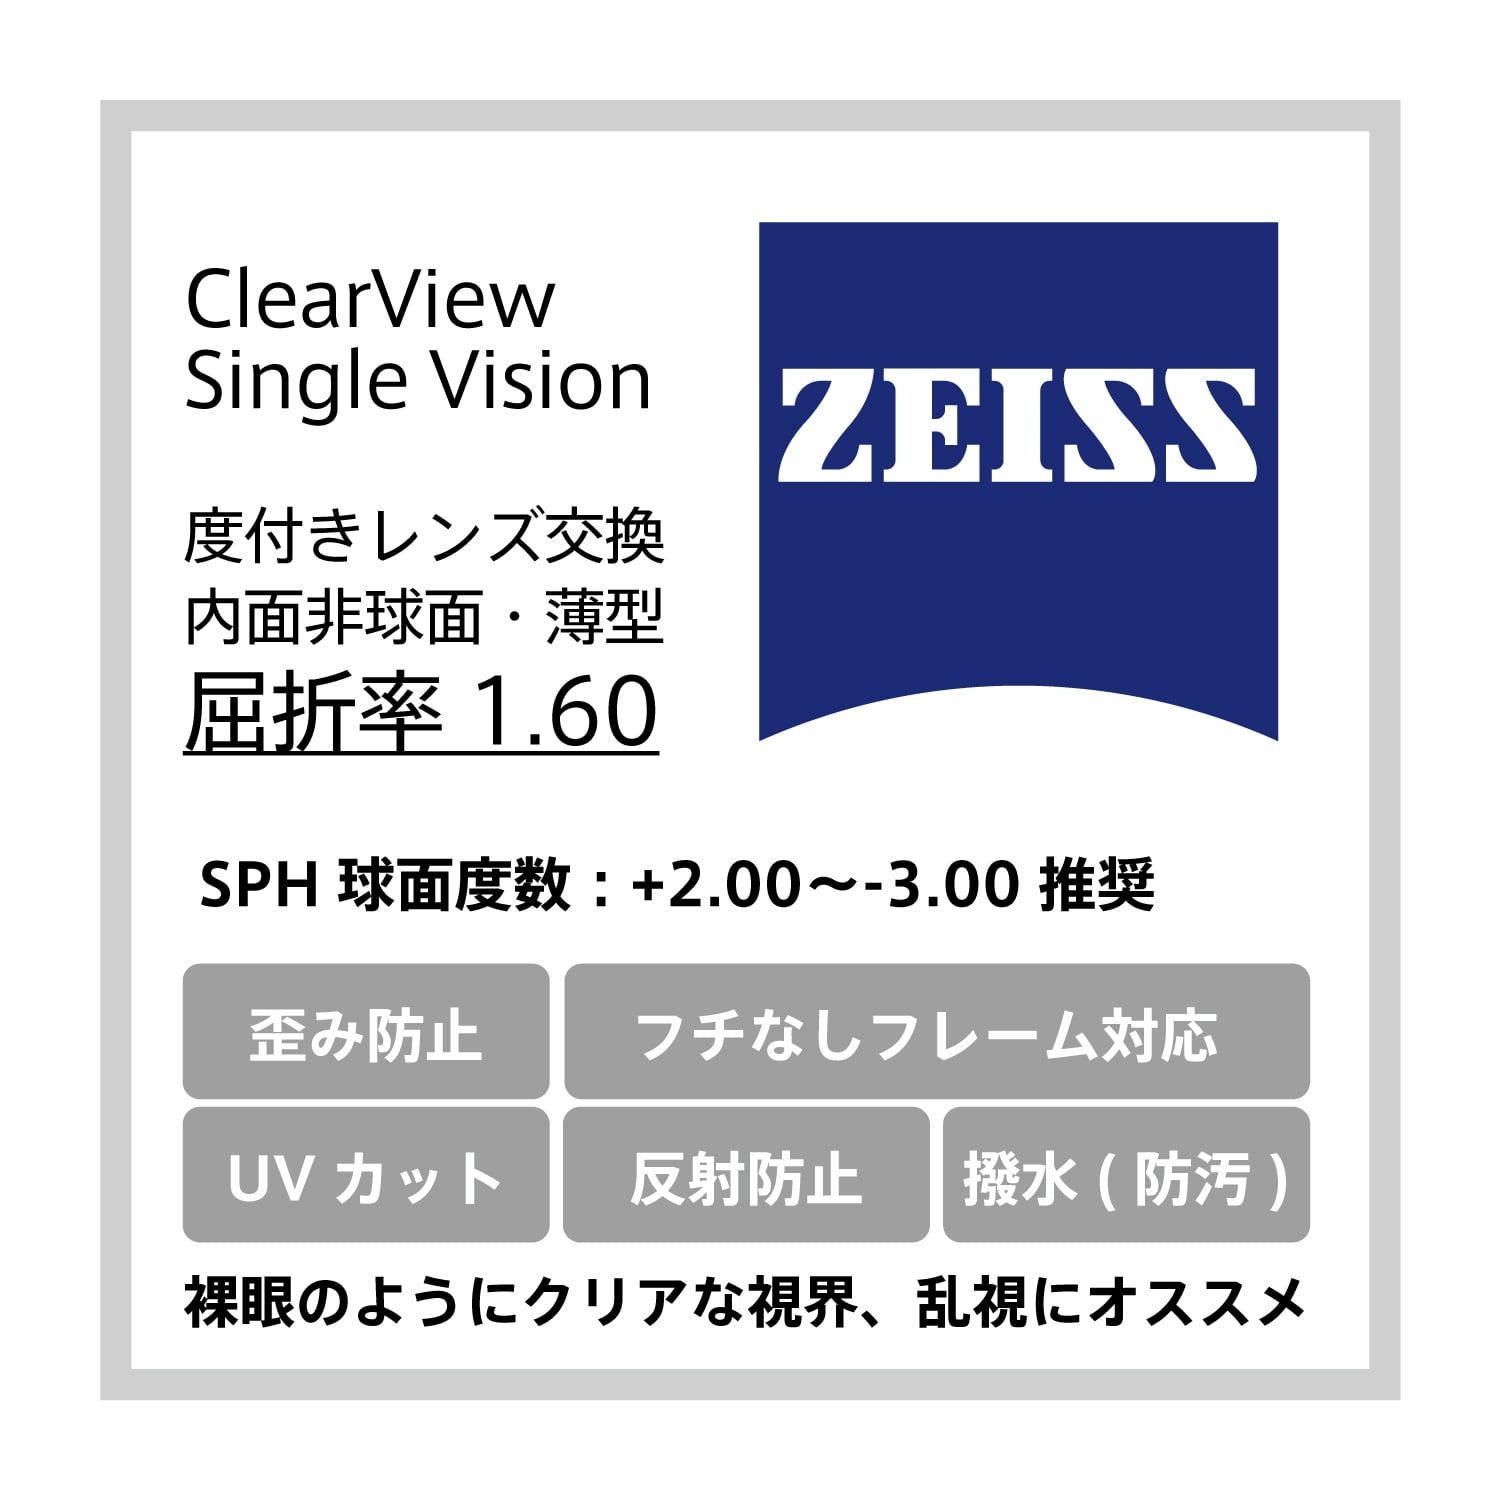 zeiss ClearView Silgle Vision 眼鏡用内面非球面レンズ 1.60